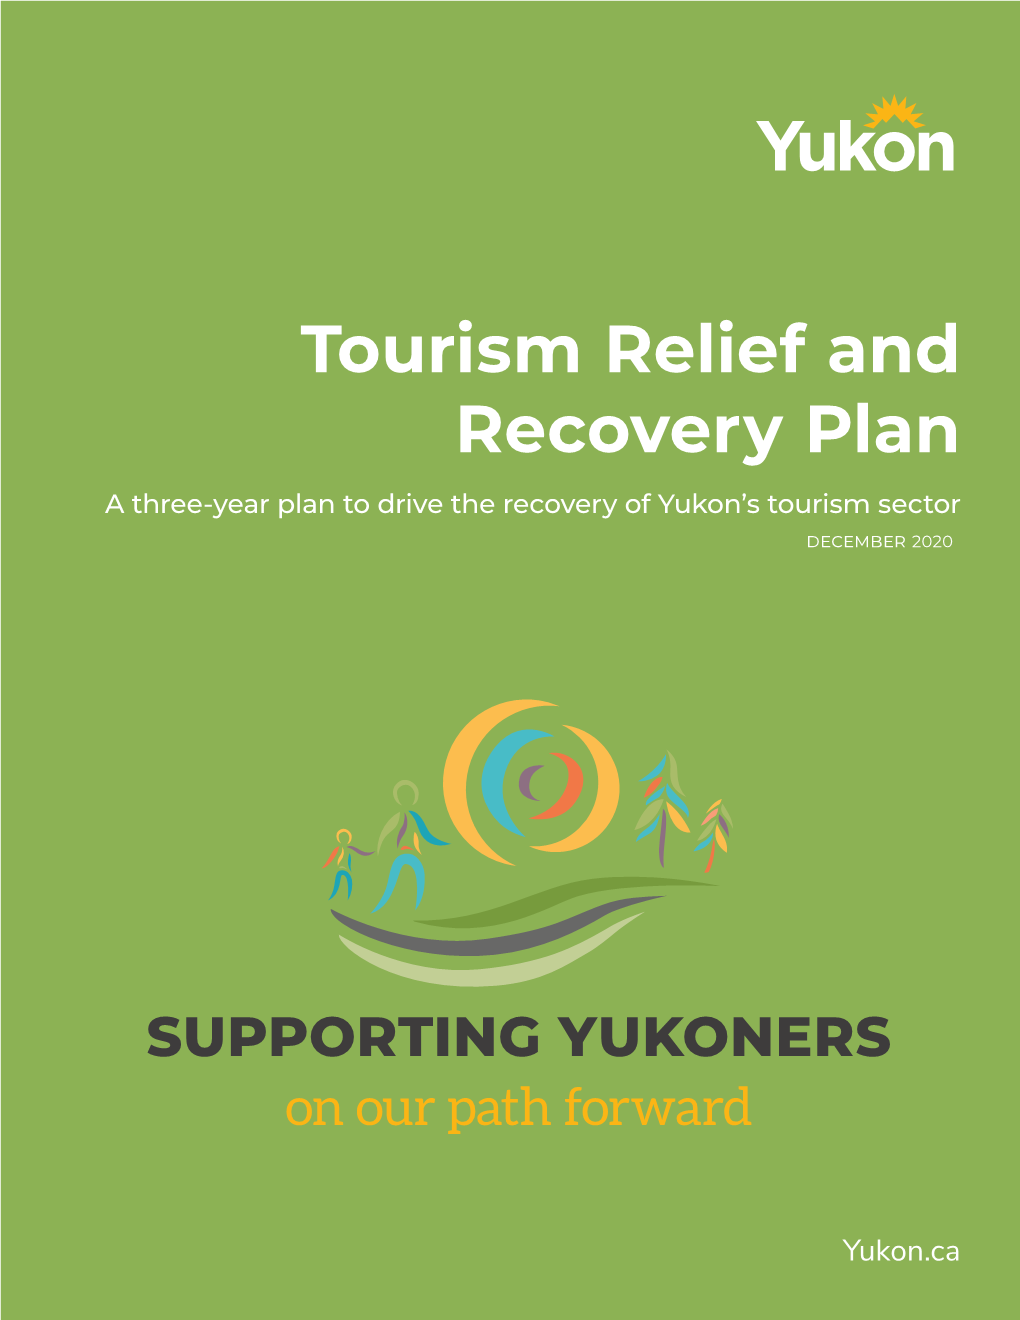 Tourism Relief and Recovery Plan a Three-Year Plan to Drive the Recovery of Yukon’S Tourism Sector December 2020